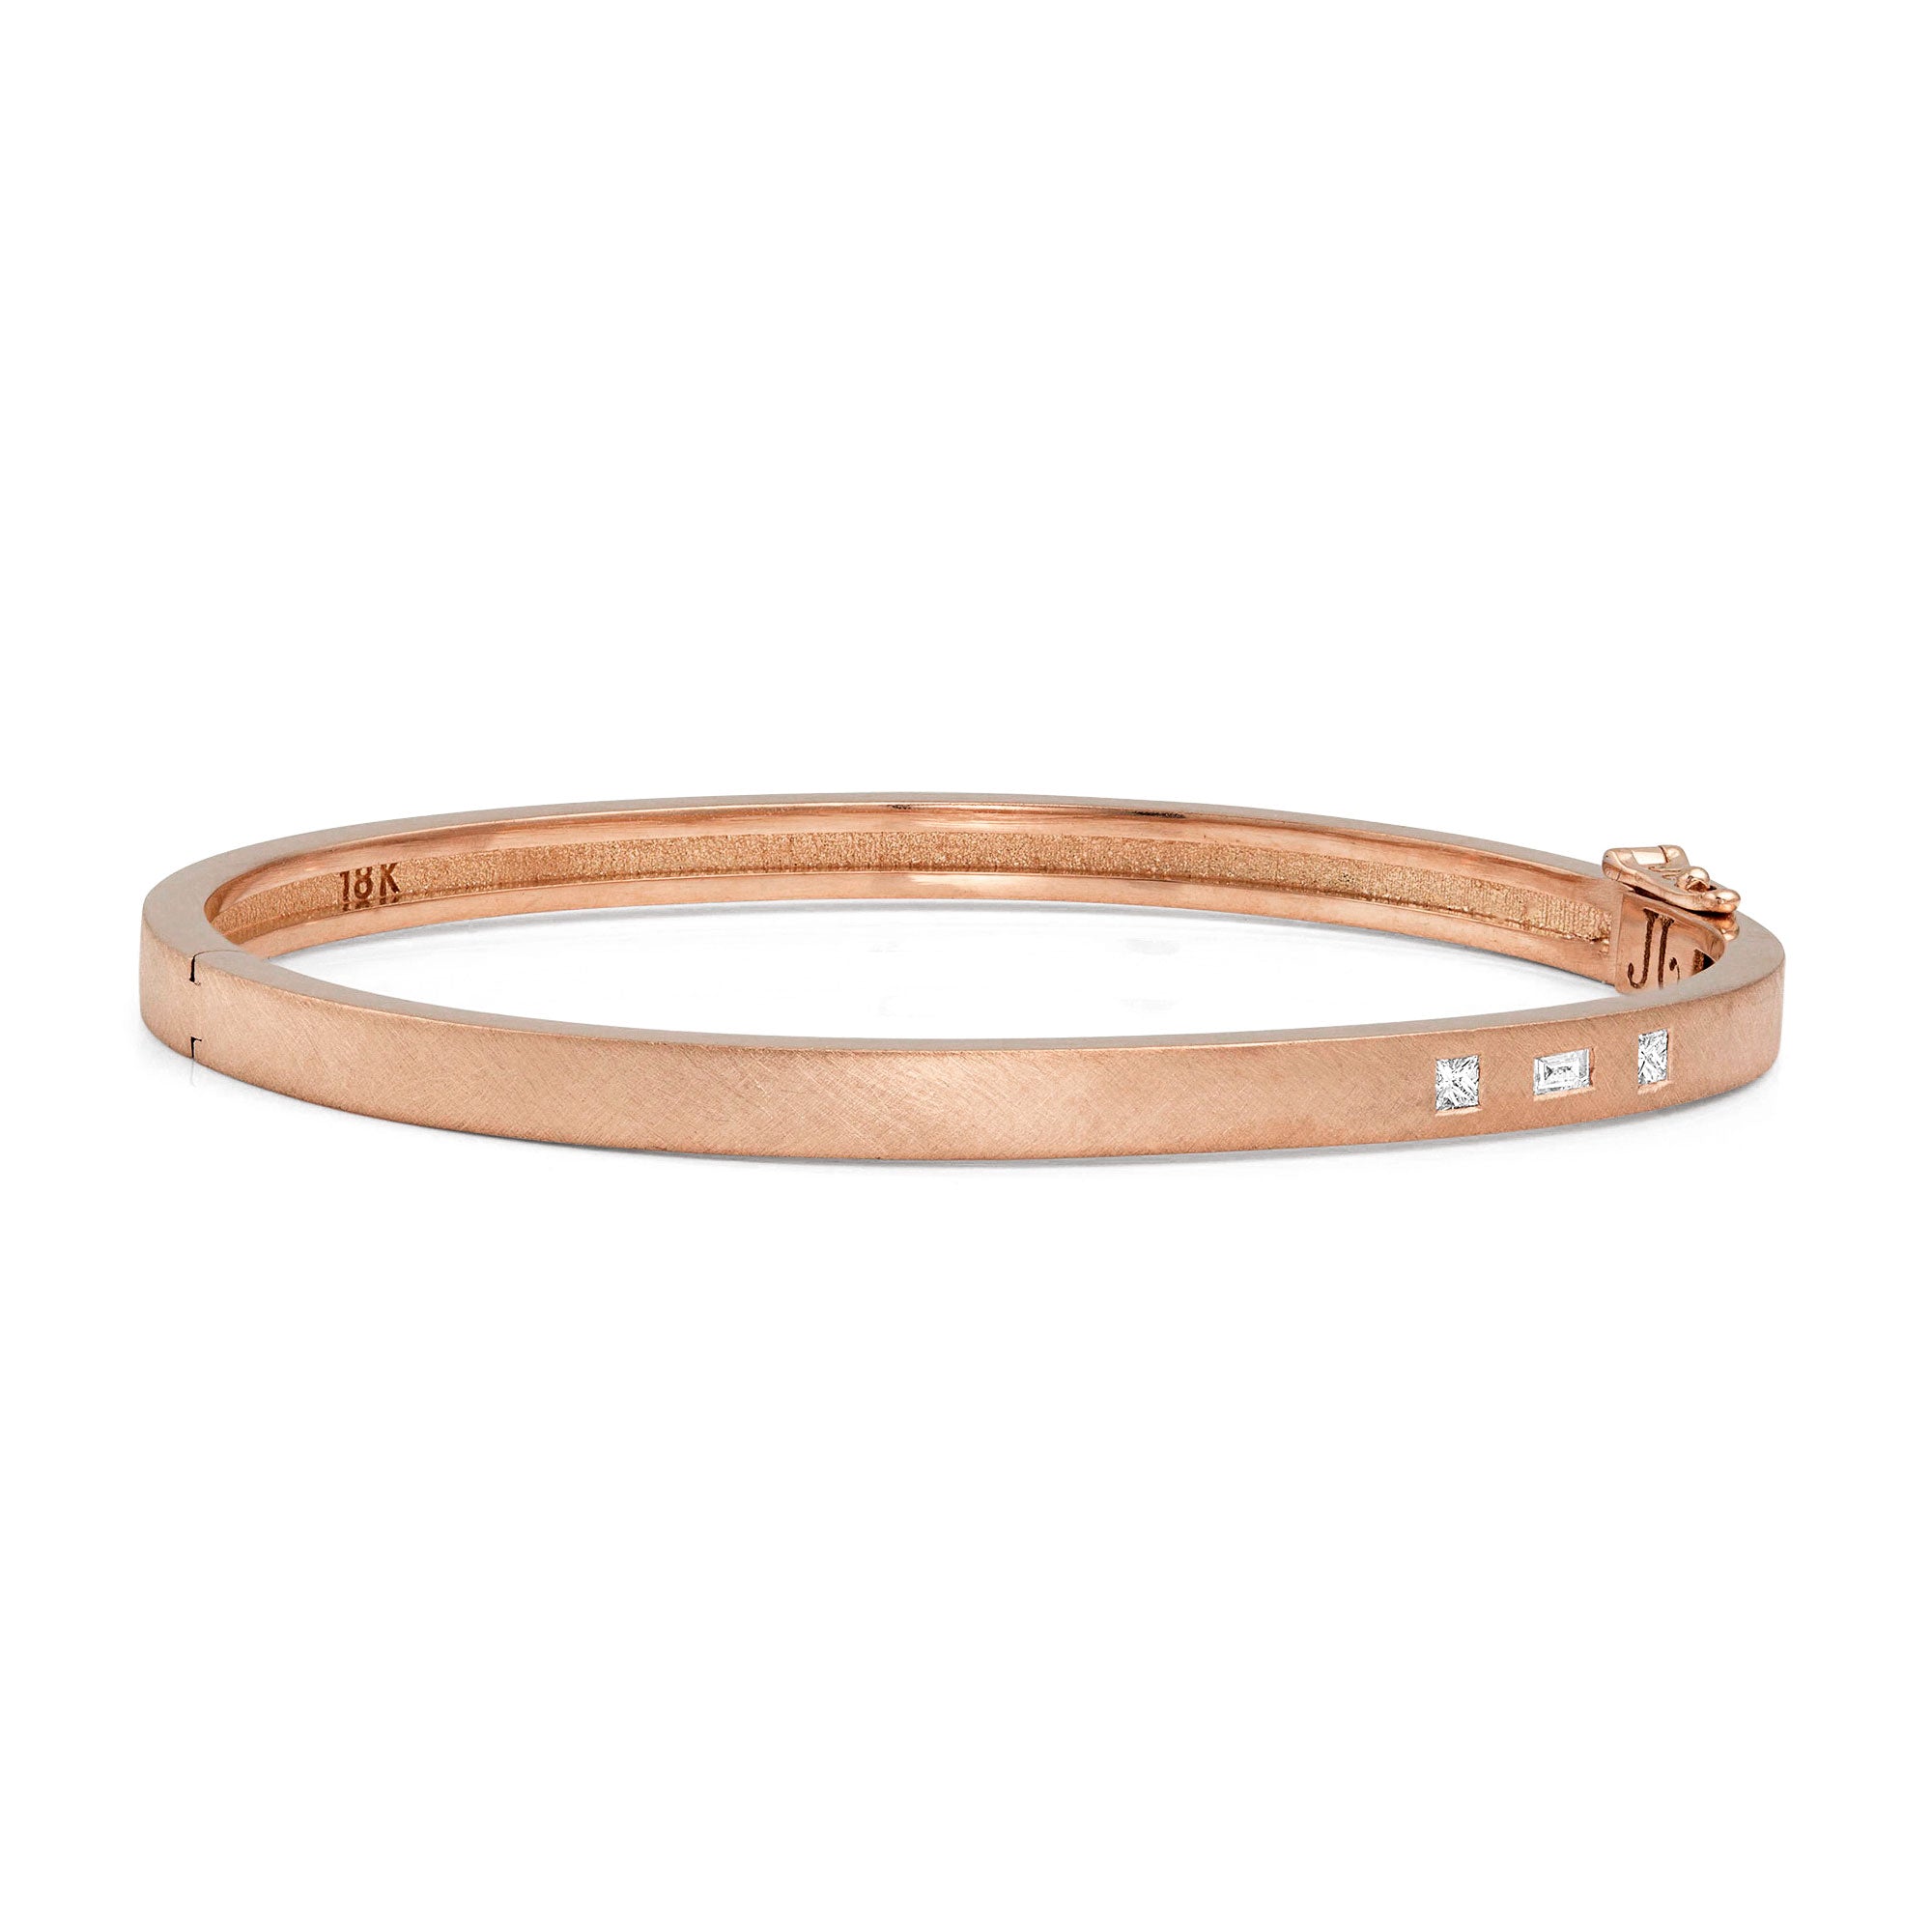 18k rose gold TING thin hinged cuff bracelet with 3 assorted diamonds